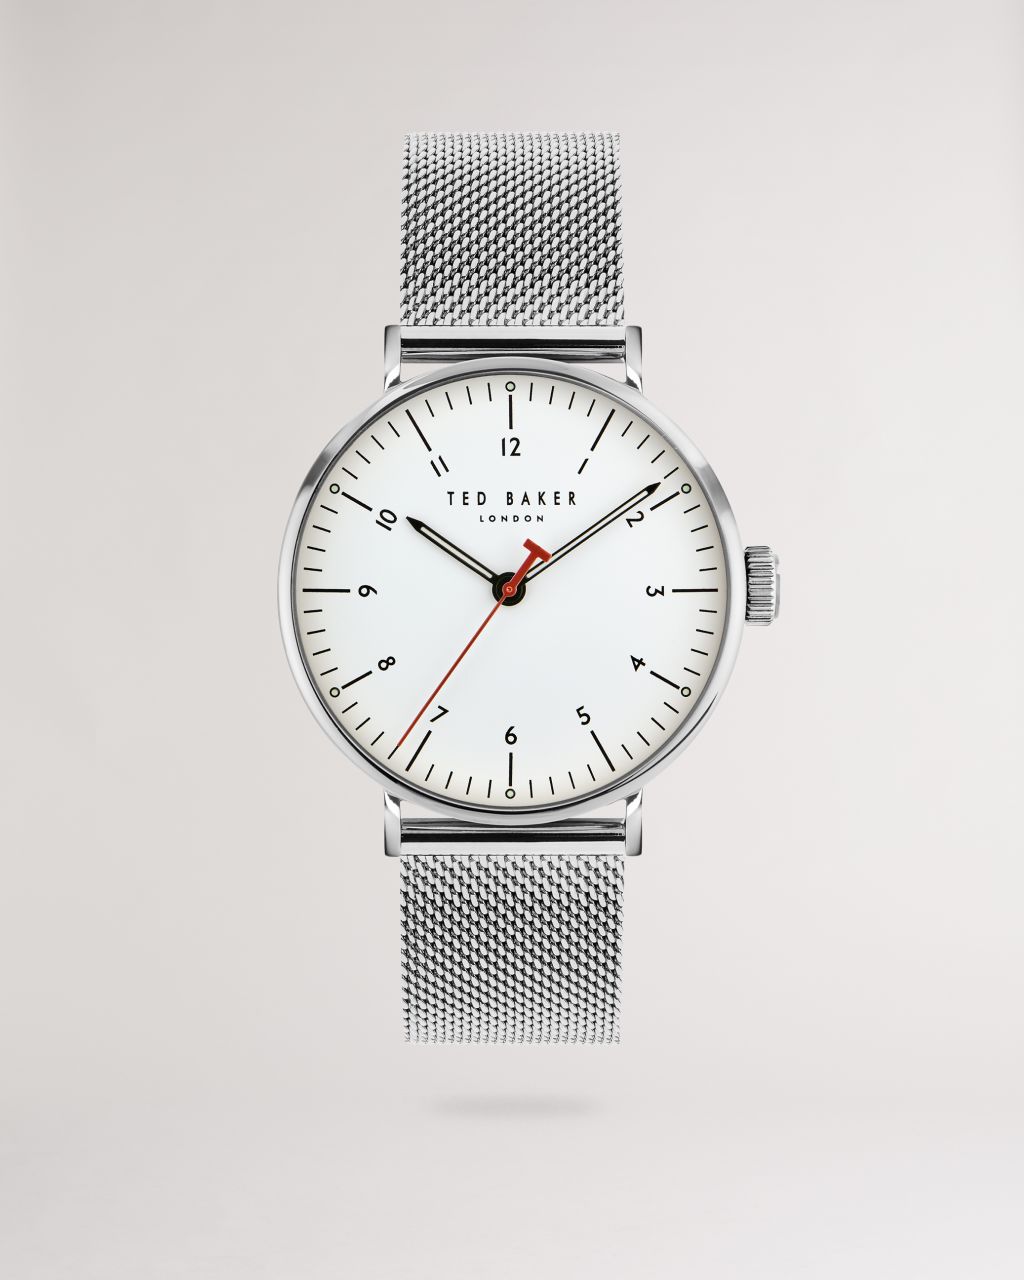 Ted Baker Mesh Strap Watch in Silver Colour FOOAM, Men's Accessories